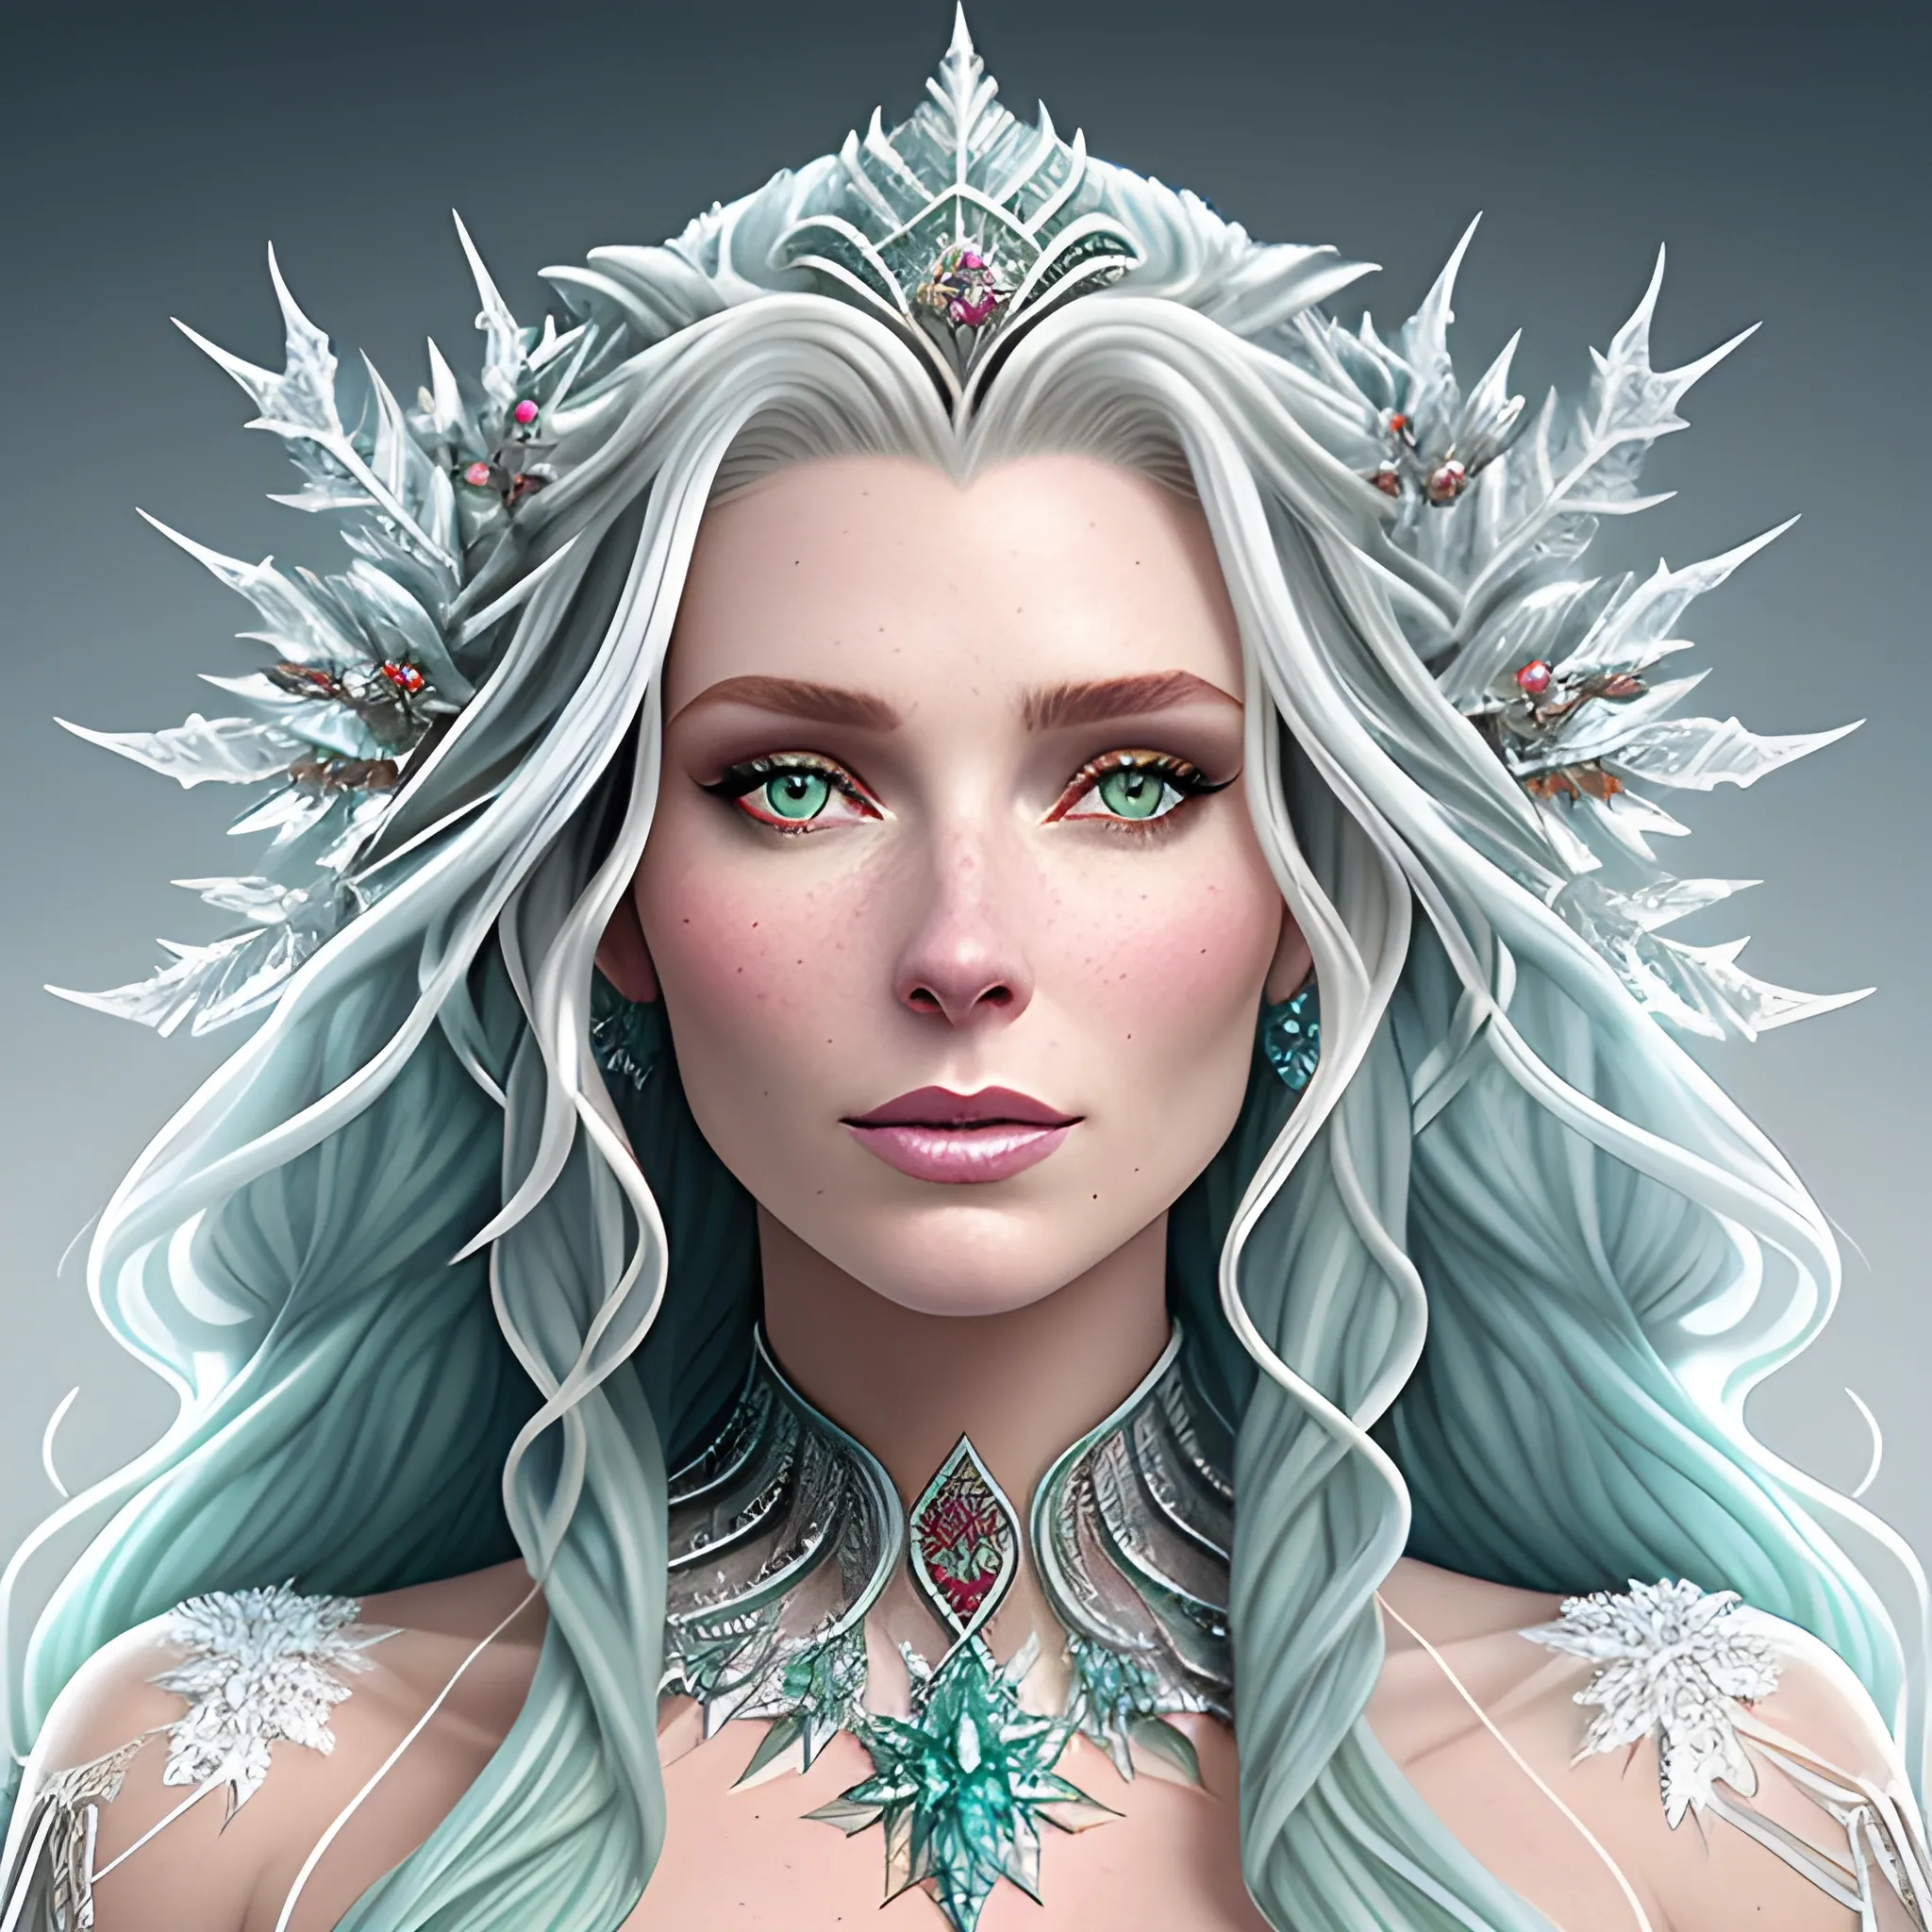 Insanely detailed “elaborate Arabian icicle goddess” Robyn Lively / Elsa Hosk / Shanina Shaik face morph; gorgeous face, green eyes, long multi-hued red curly hair, intricate icy snowflakes; Camille d’errico, Jean baptiste monge, and Tom Bagshaw CGSociety ZBrush Central fantasy art, 8K resolution HDR, white, shiny, winter gradients colors, frozen